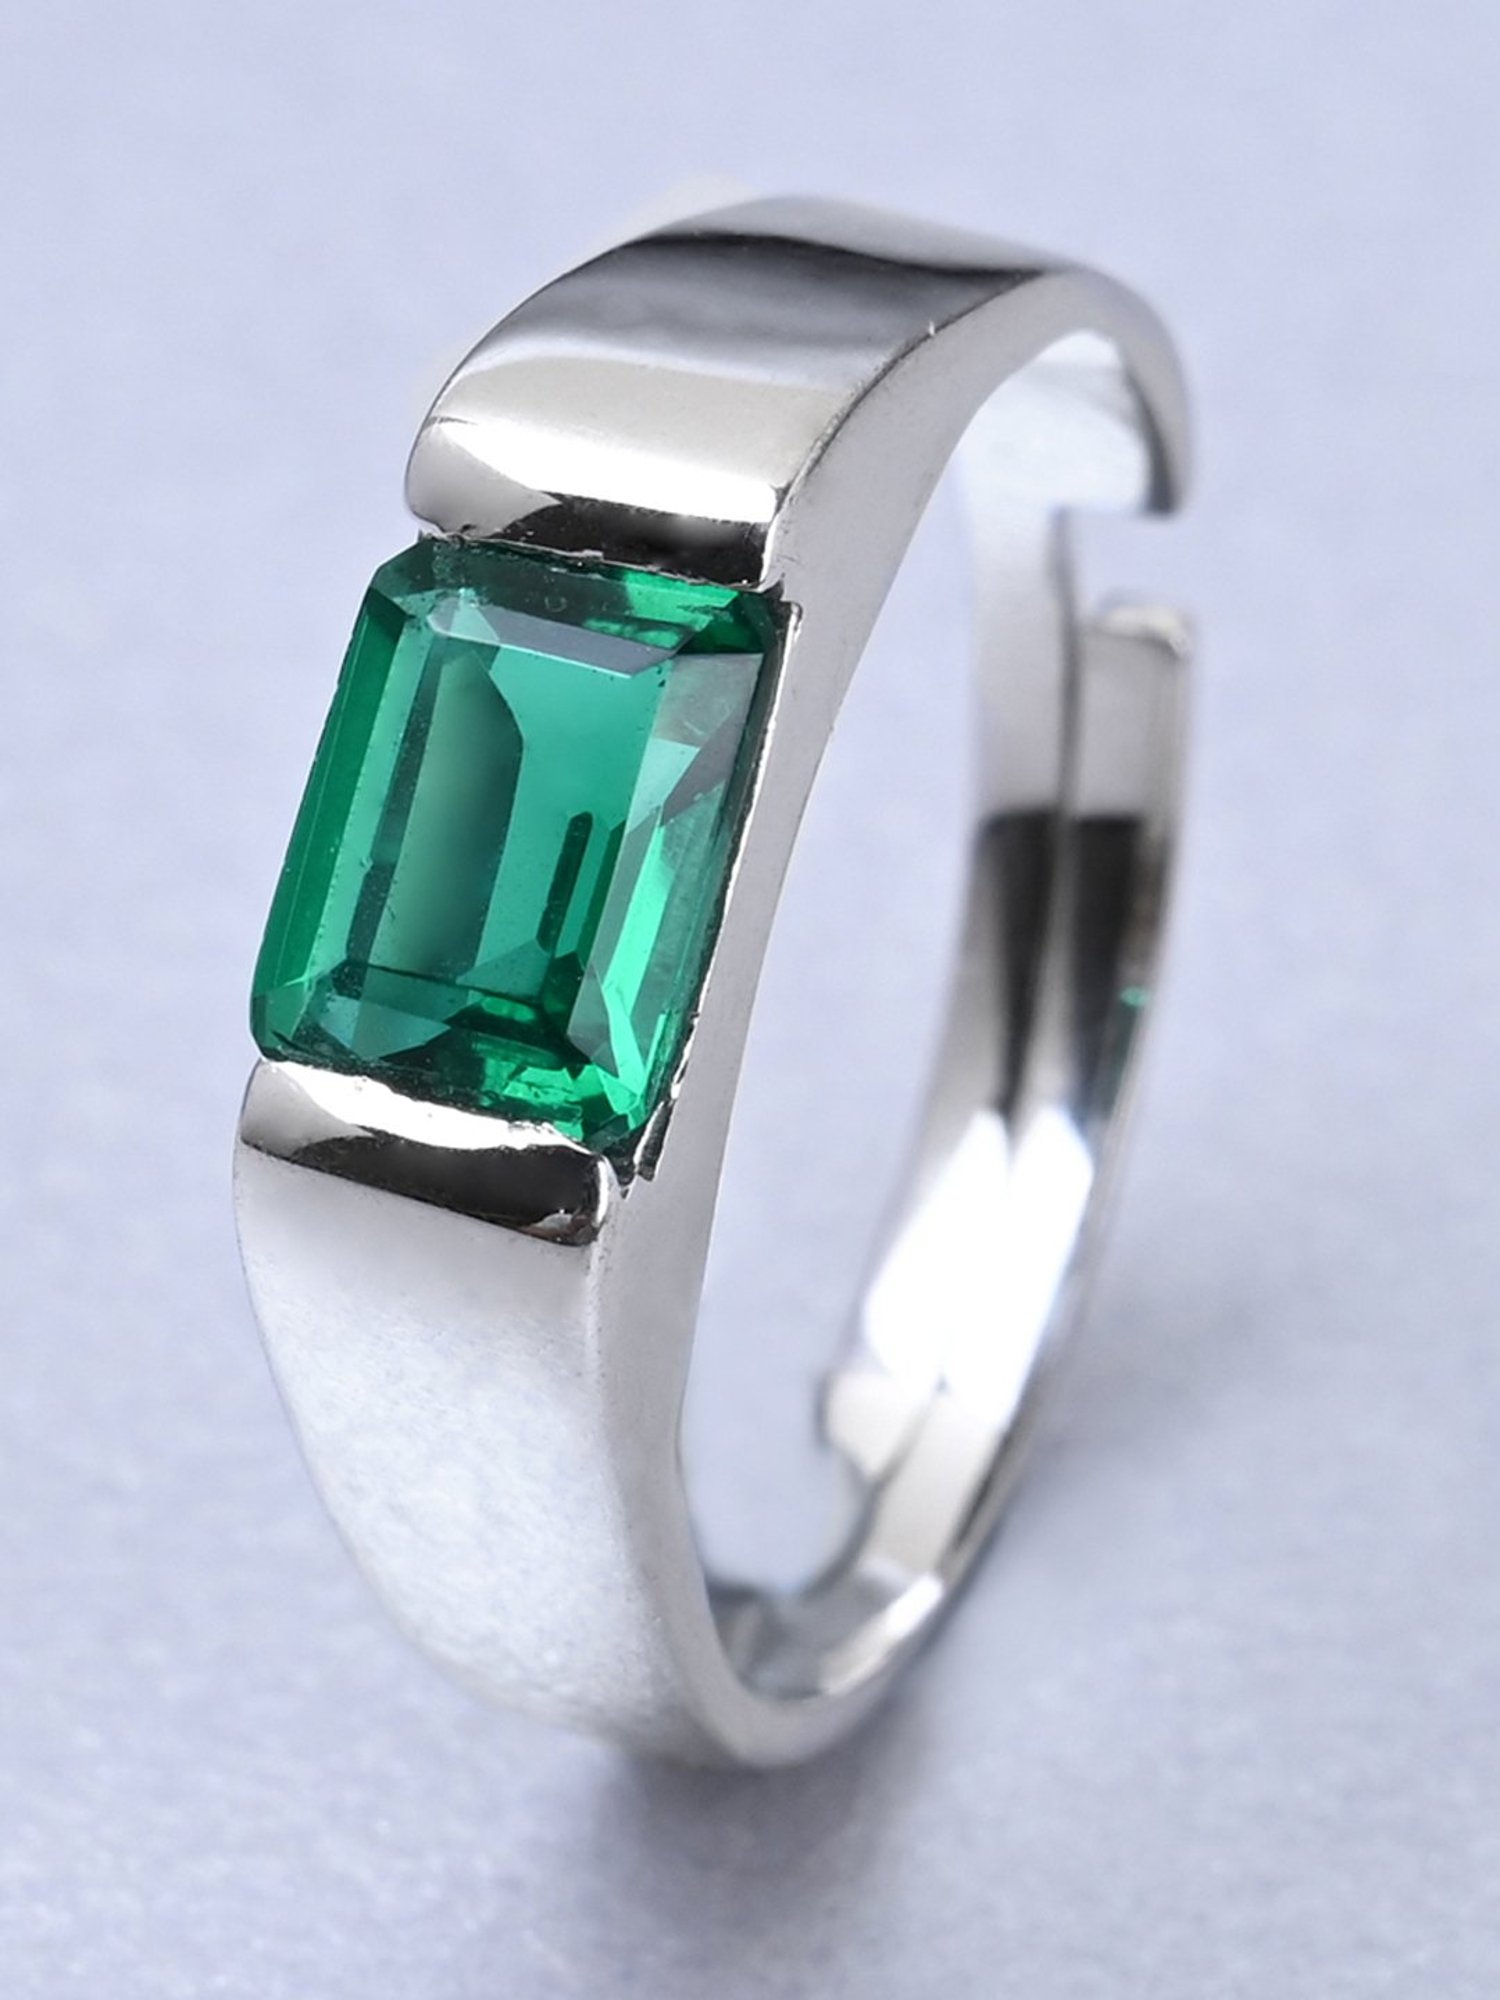 PYTALI Emerald Gemstone Ring for Men Square Emerald Silver Ring with Emerald  Gemstone Sterling Silver Unique Vintage Retro Pattern Ring Jewelry for Men  Boy Father's Day Gift Sizes 4 to 10(6)|Amazon.com